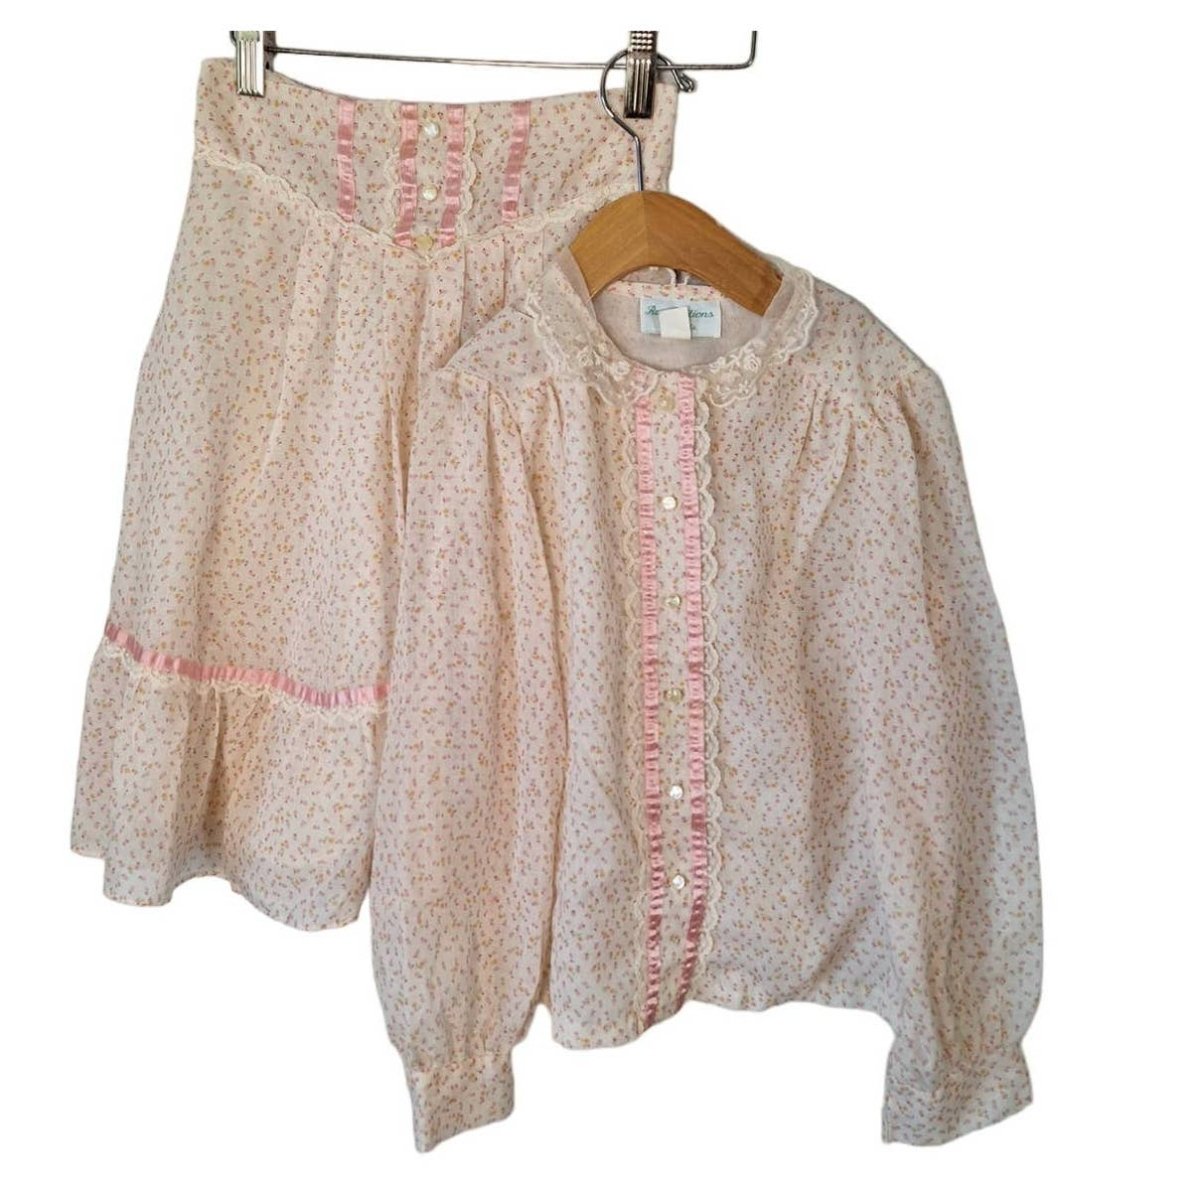 Vintage 70s Kids Prairie Skirt and Blouse Set Girls Size 8 - themallvintage The Mall Vintage